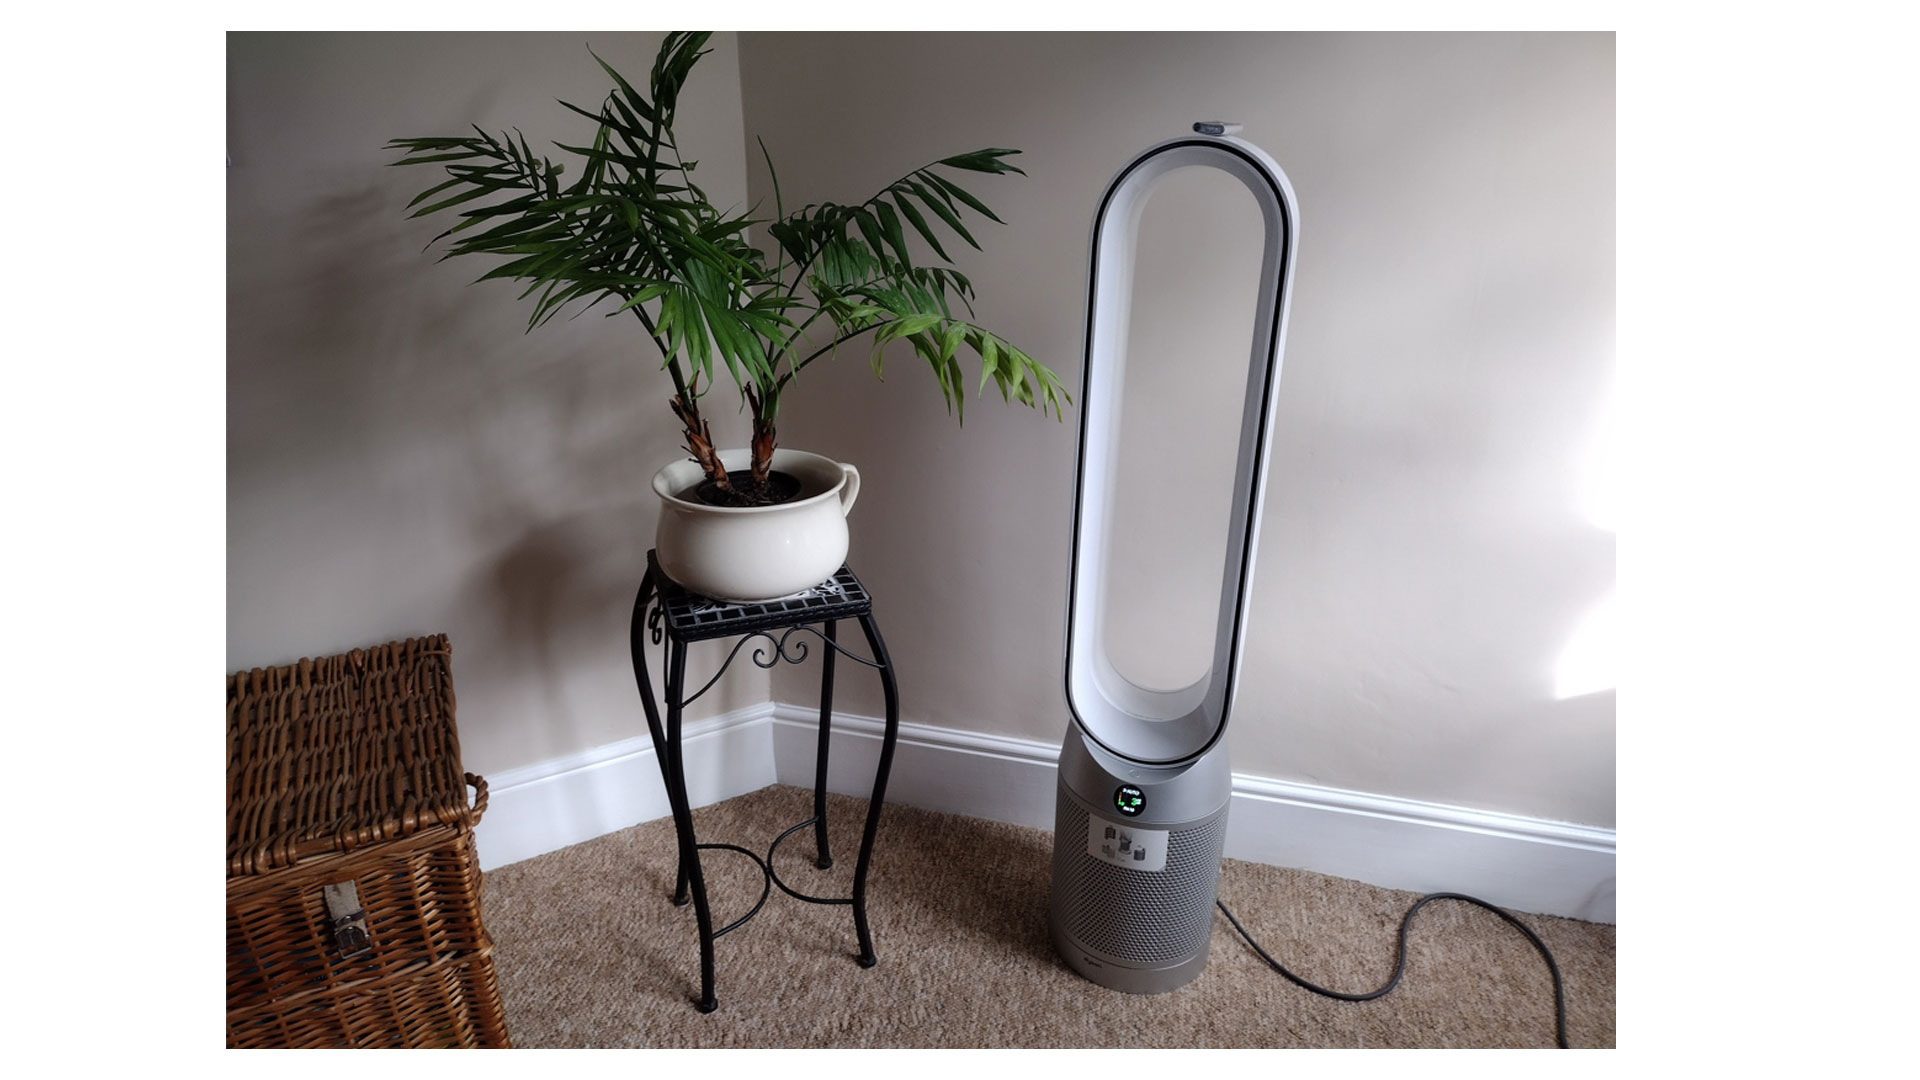 Dyson Purifier Cool review: Image shows the air purifier in a living room setting.